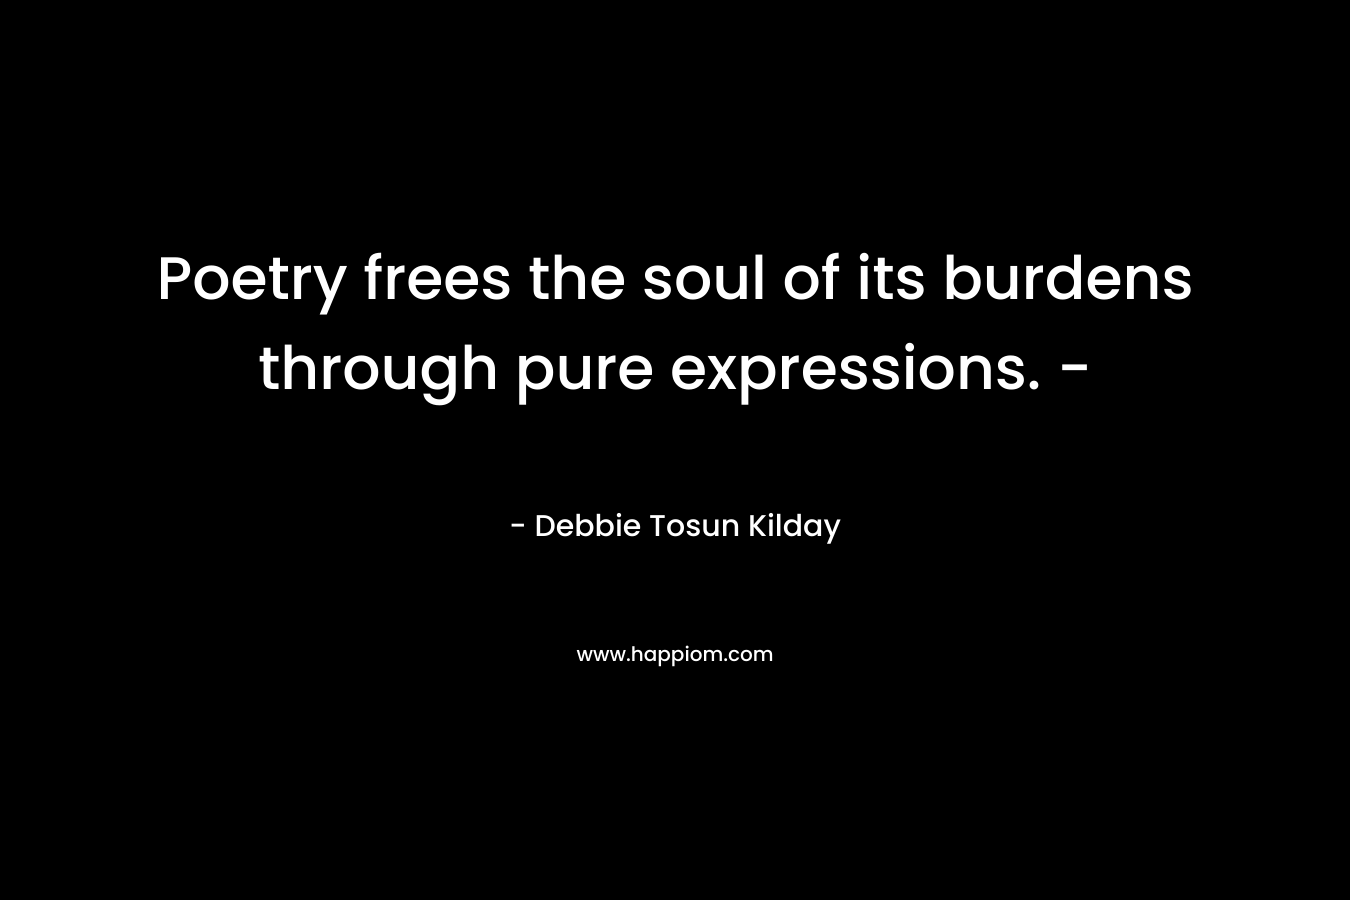 Poetry frees the soul of its burdens through pure expressions. -